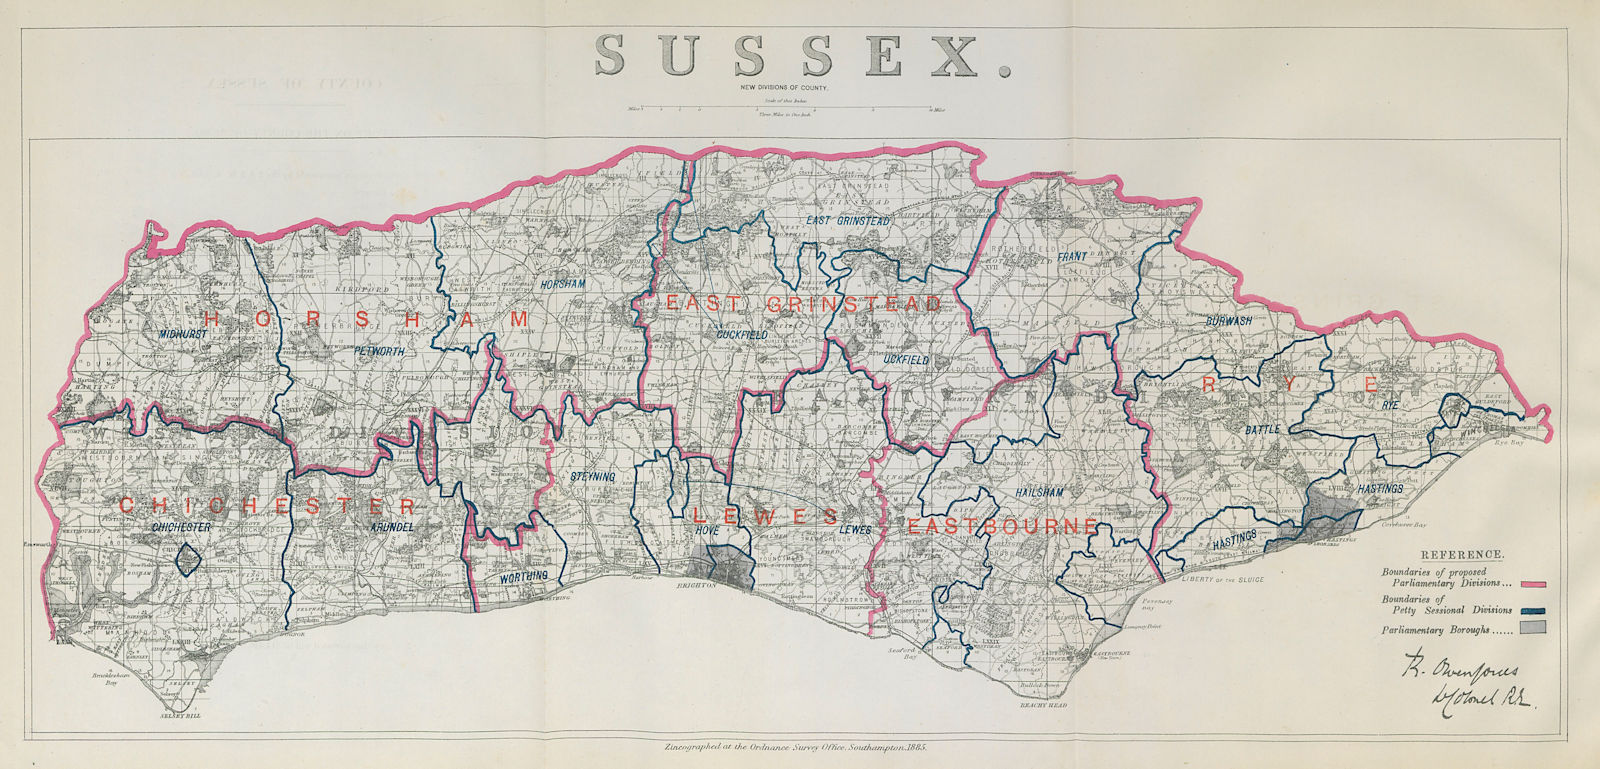 Associate Product Sussex Parliamentary Divisions. Chichester Lewes. BOUNDARY COMMISSION 1885 map